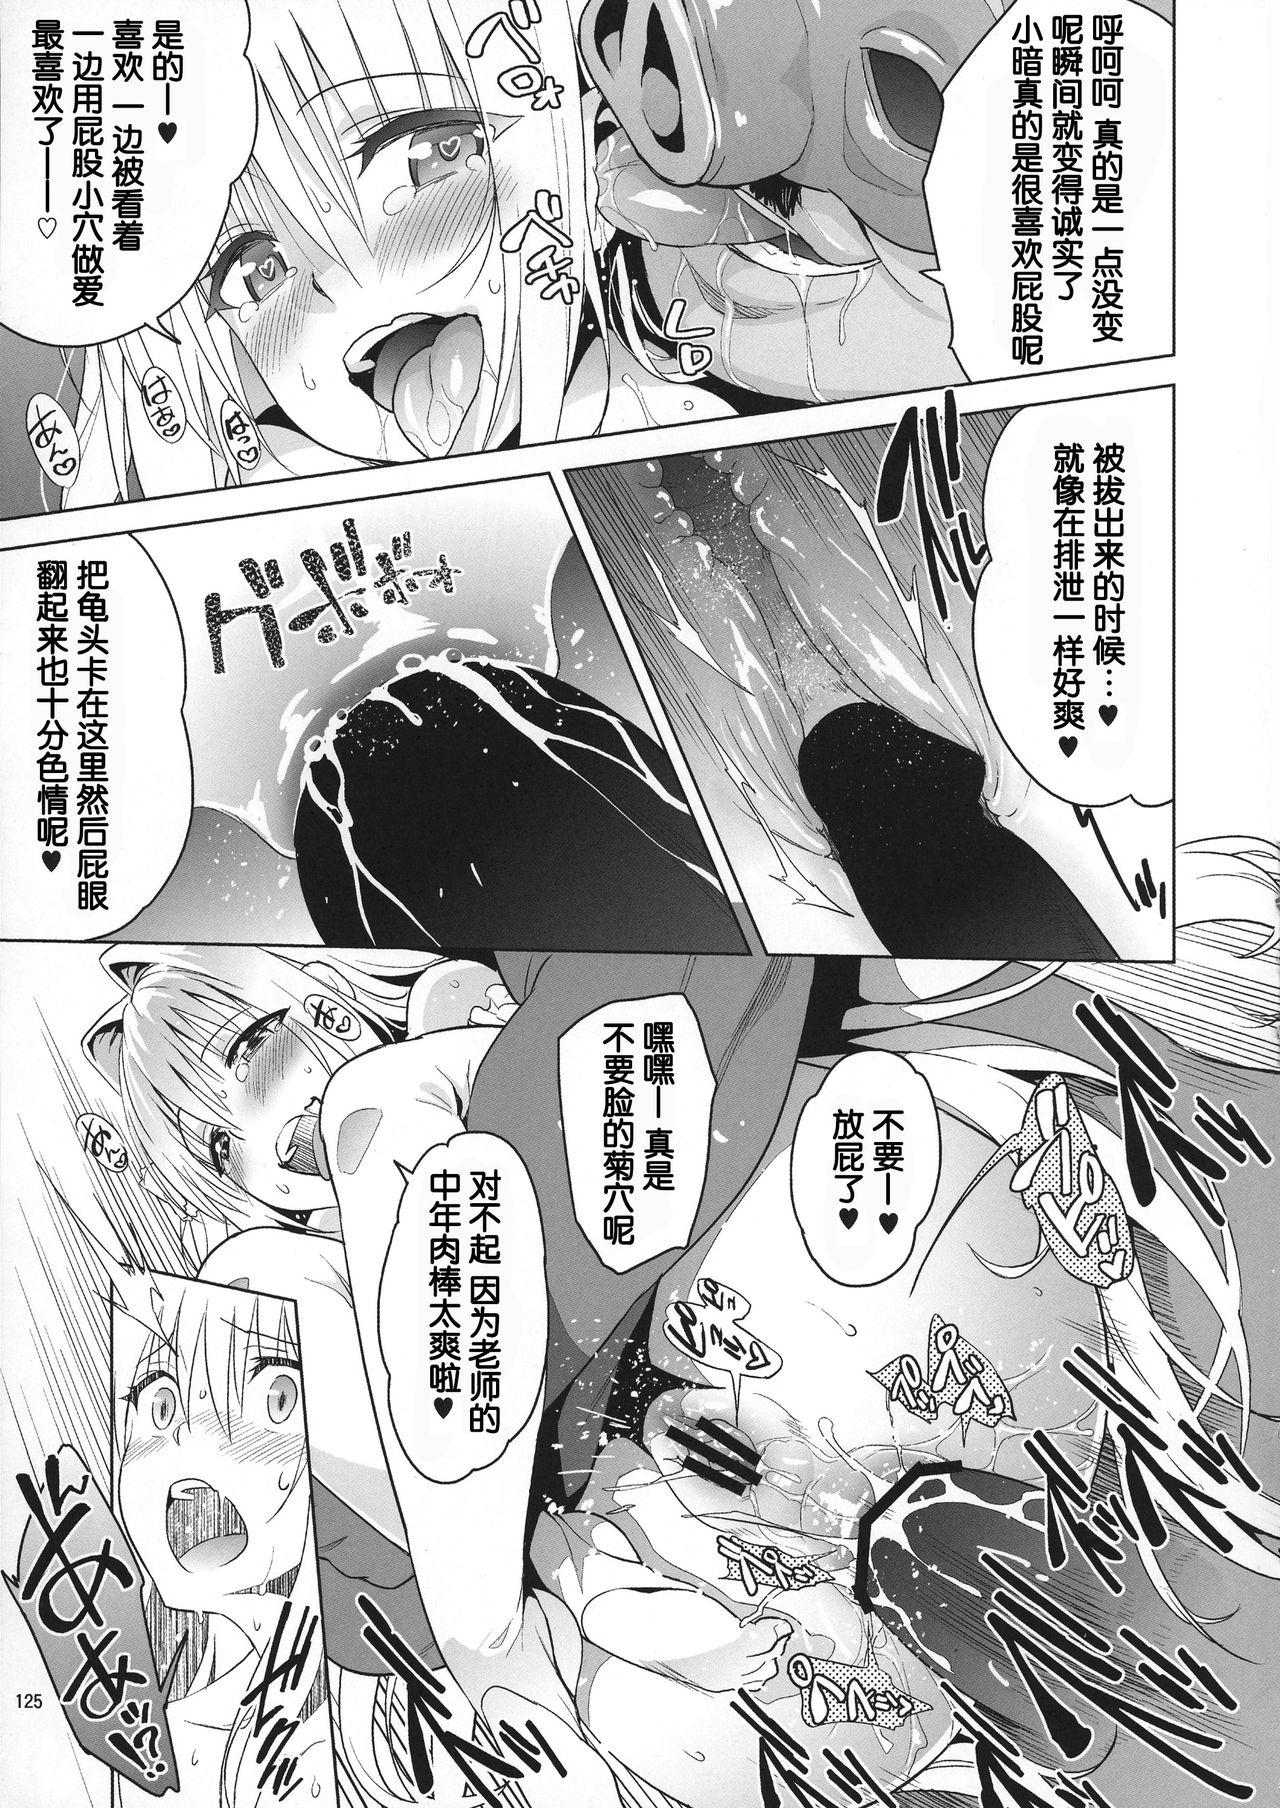 Outdoor Sex harem end - To love-ru Body Massage - Page 11